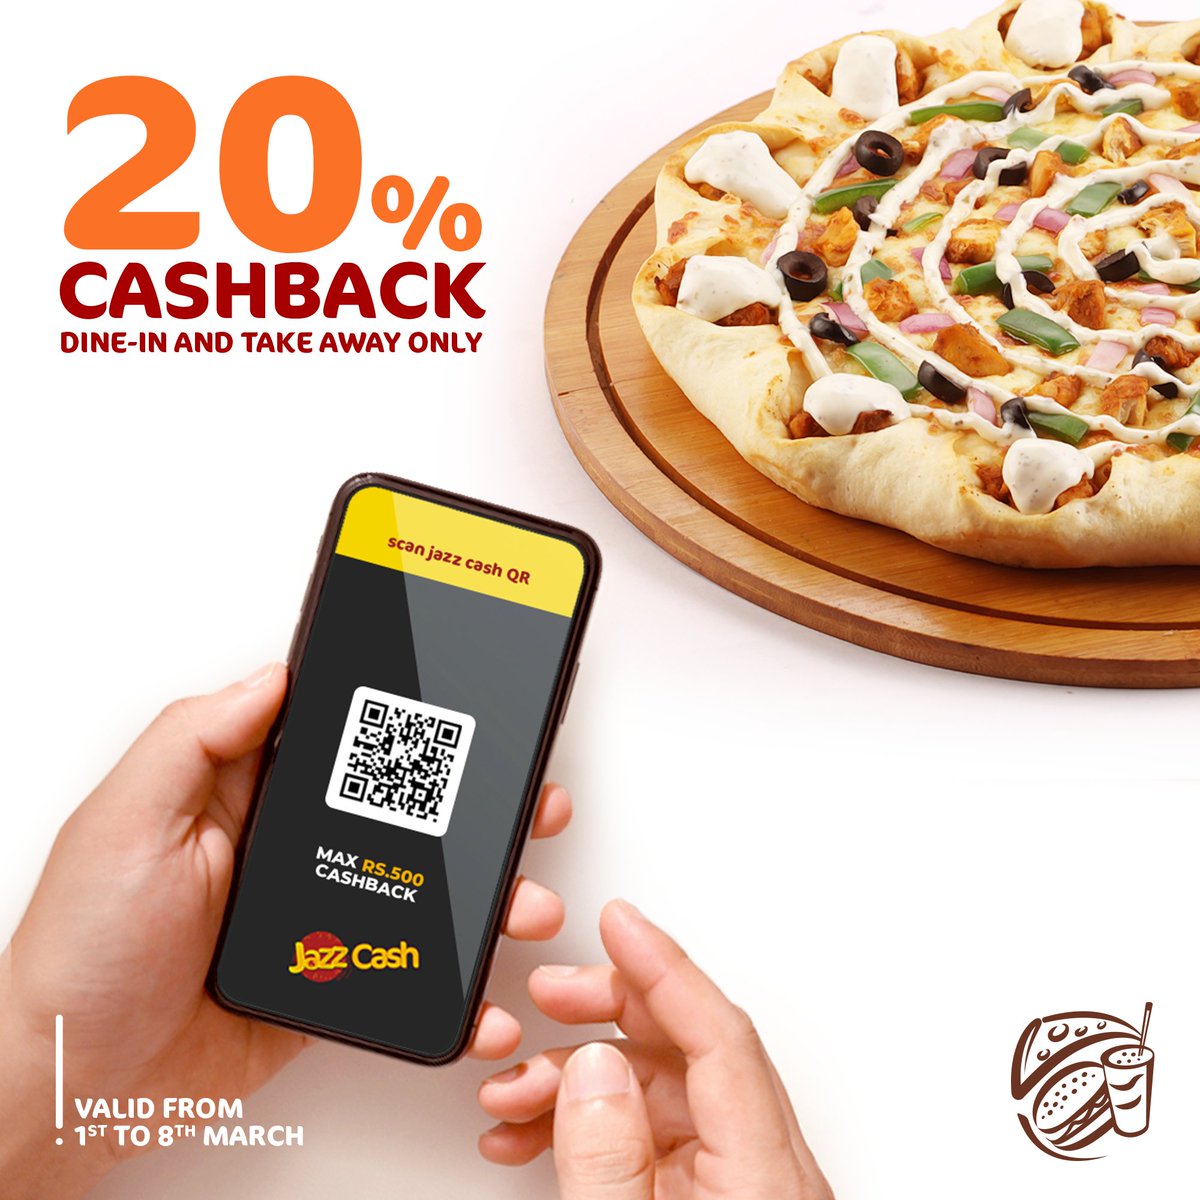 Get 20% cashback on your dine-in or take-away orders when you pay with Jazz Cash! Don't miss out on this Cheezy deal!
Max 500 Cashback, valid from 1st march to 8th march 2023 🍔💸 

#JazzCash #CashbackOffer #DineInTakeAway #Cheezious #PSL08 #islamabad #crowncrust